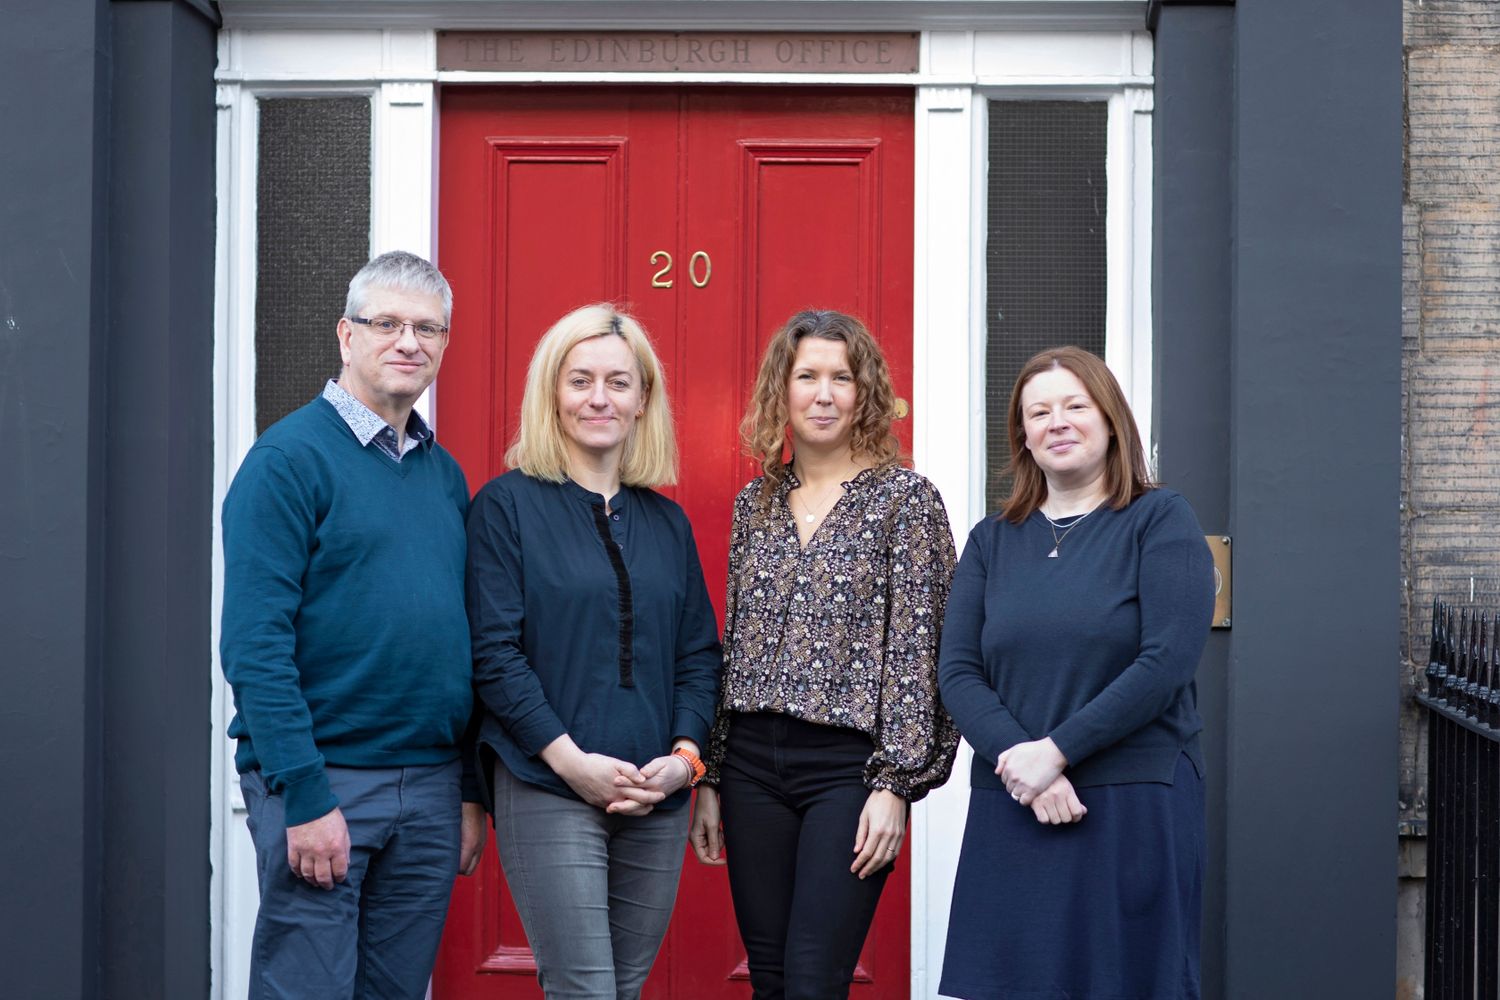 Gallery Photo of Our team of highly skilled and experienced therapists with a variety of specialisms and availability to suit different needs.